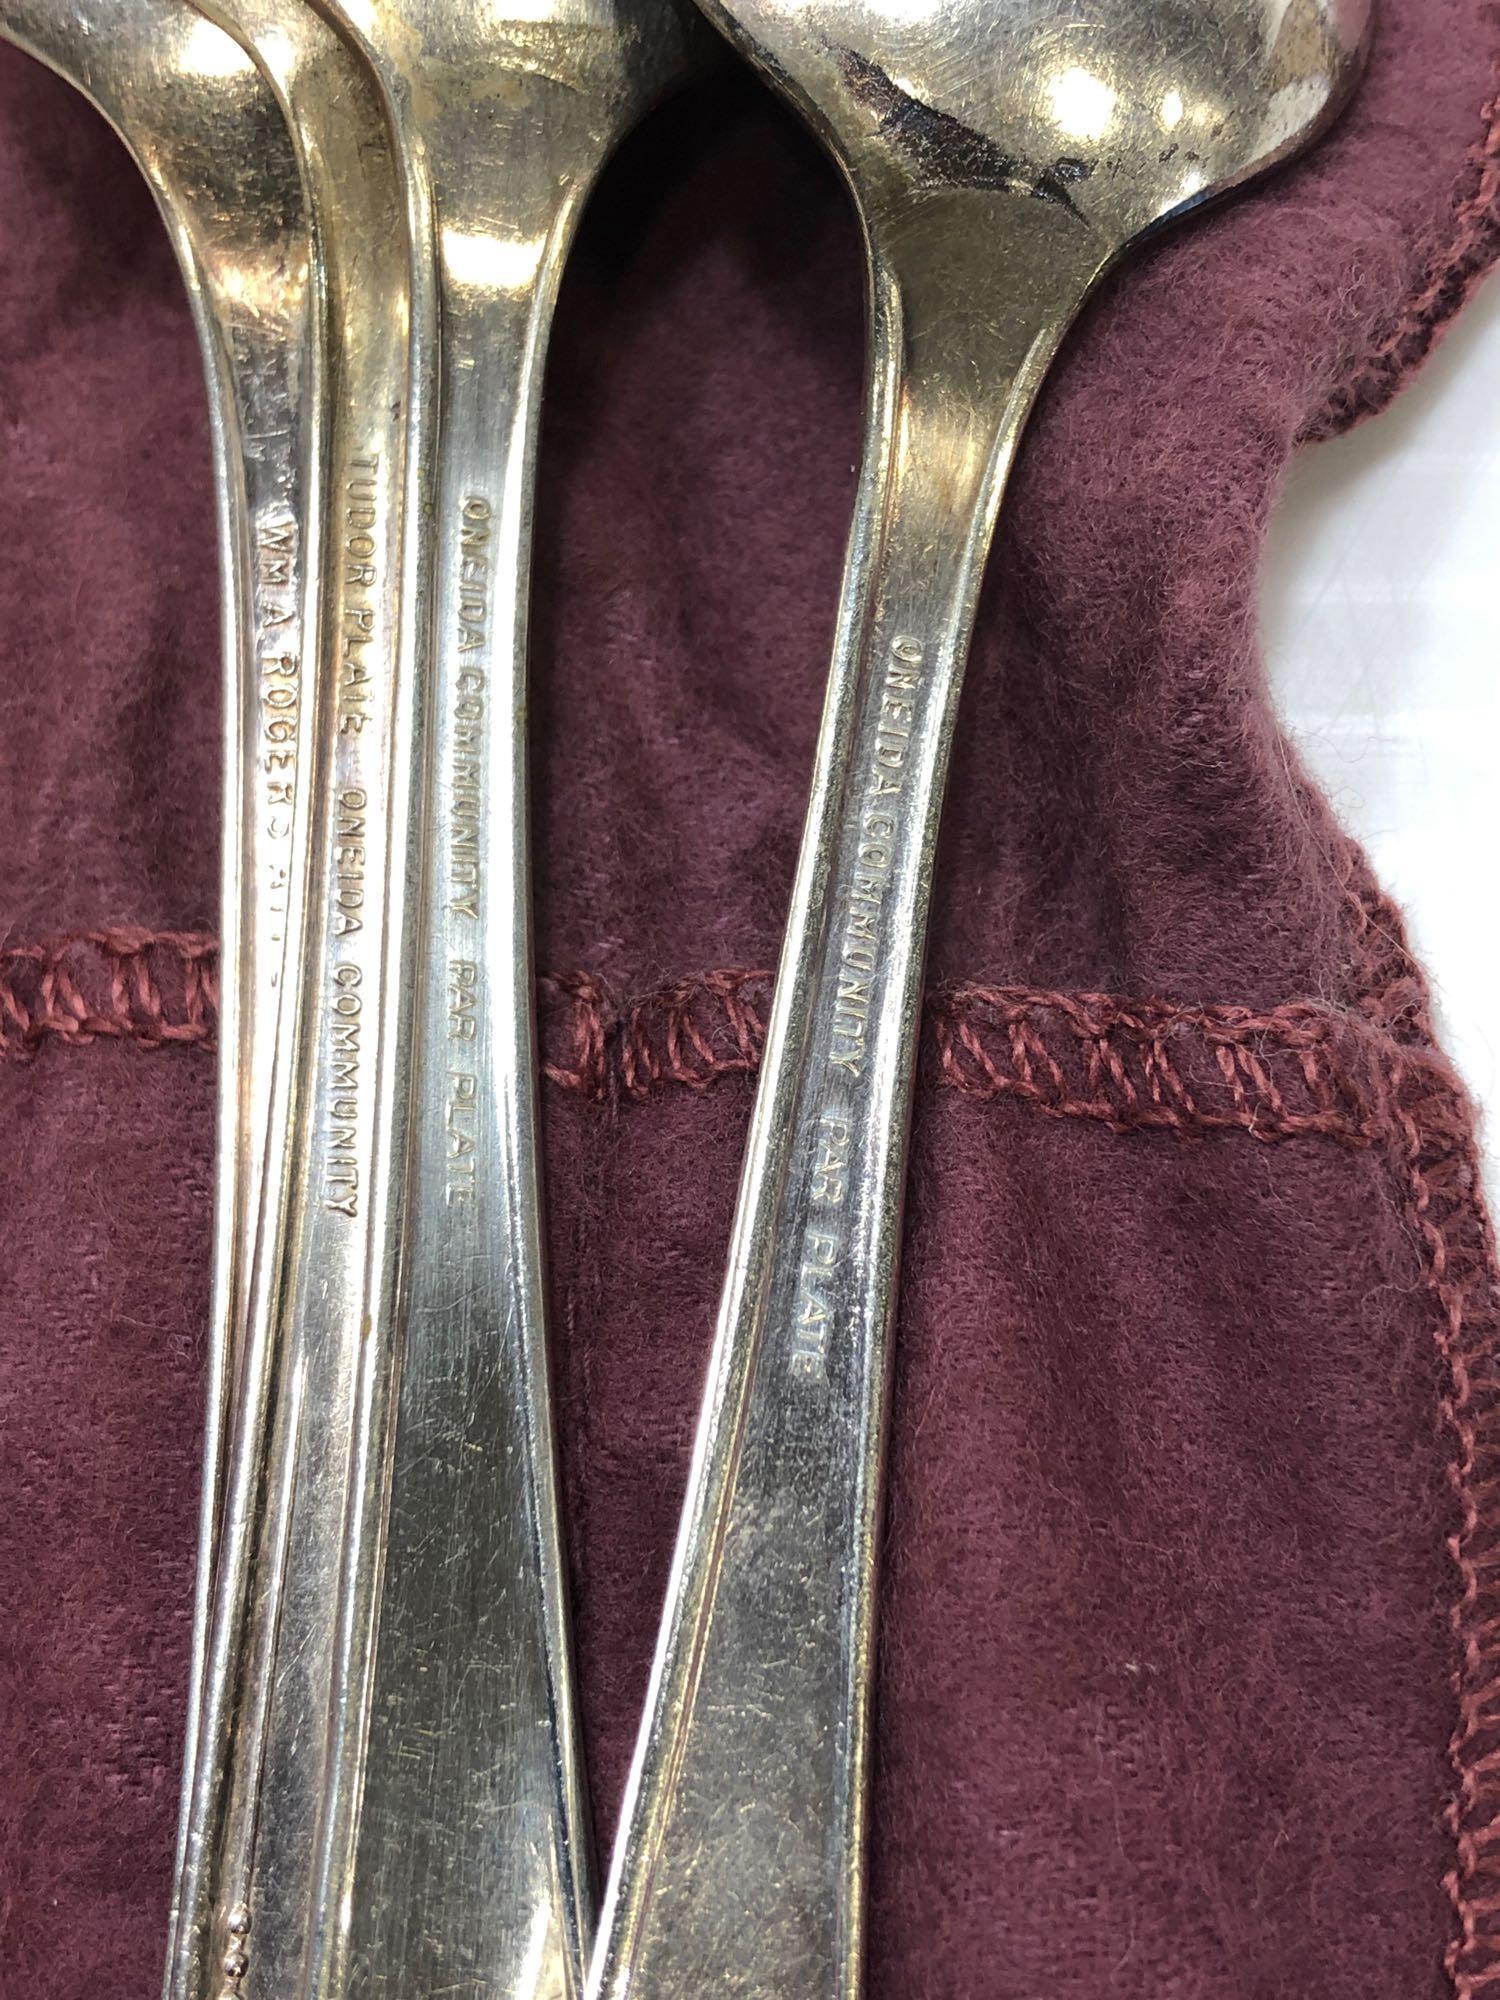 Stainless steel and silver flatware